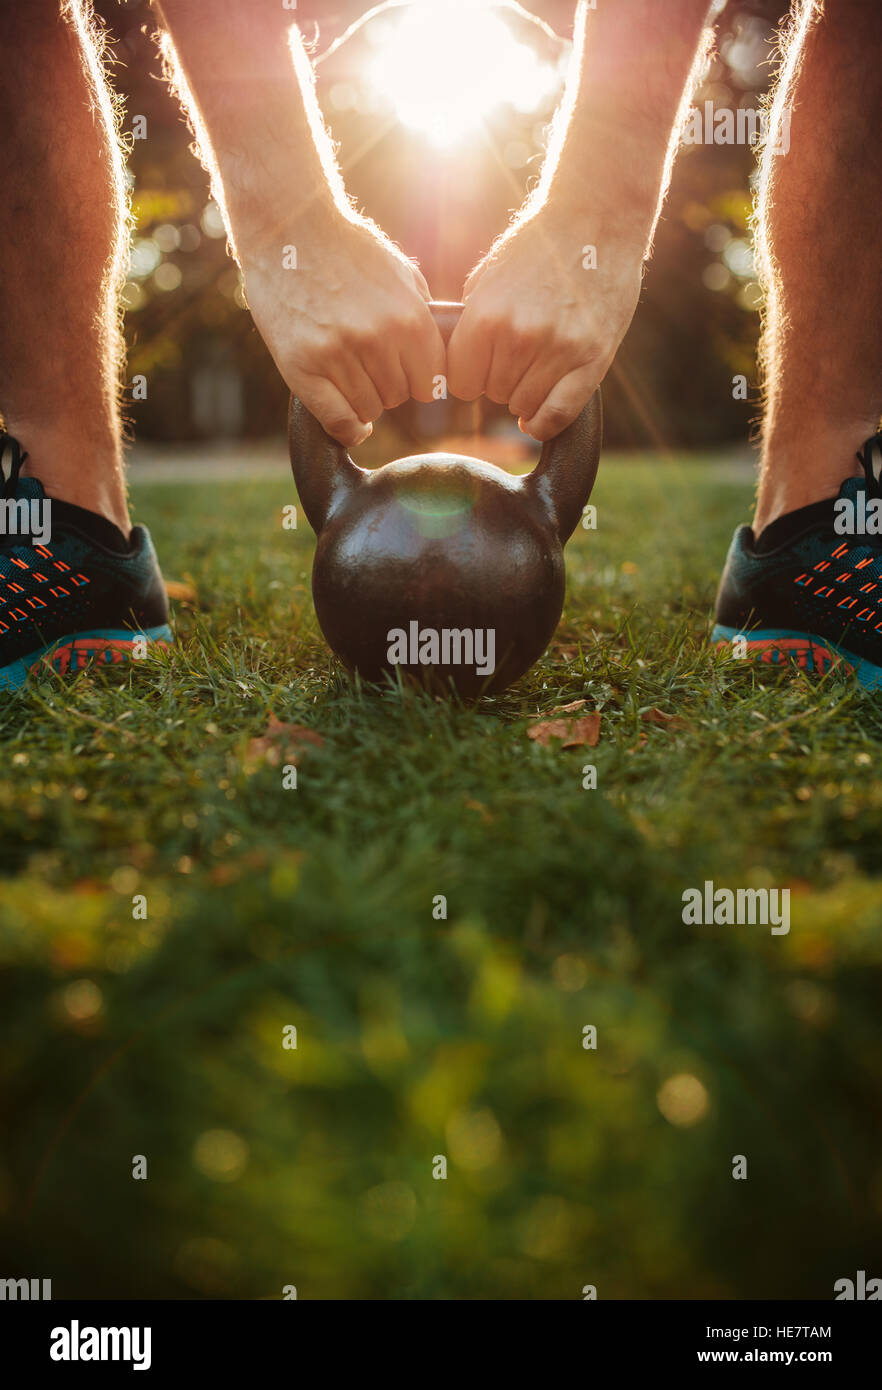 Cropped shot of young man doing kettlebell workout, focus on hands holding kettle bell on grass. Stock Photo